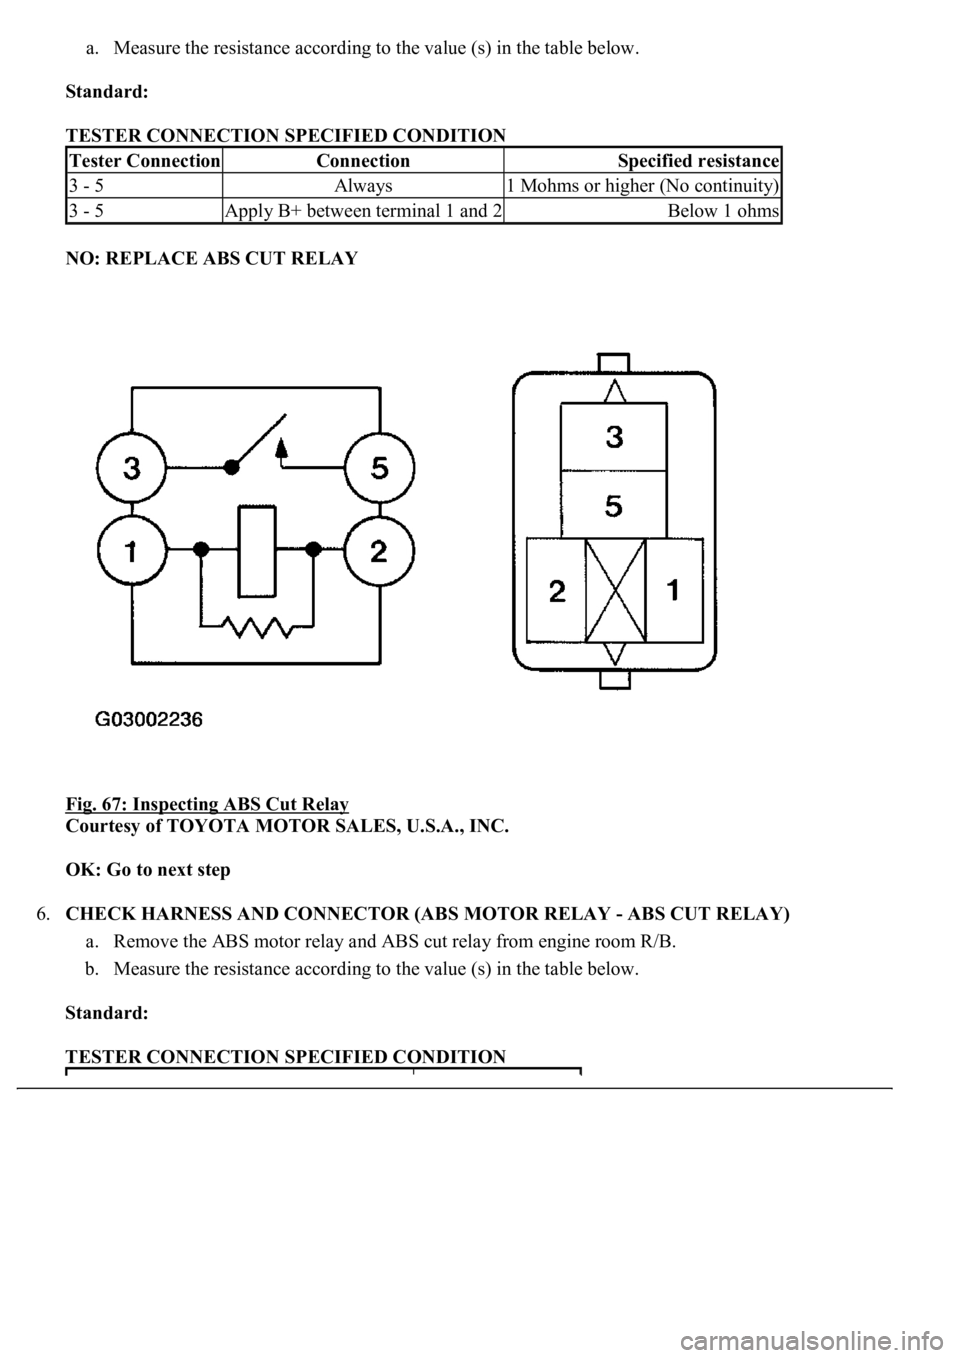 LEXUS LS430 2003  Factory Repair Manual a. Measure the resistance according to the value (s) in the table below.  
Standard:  
TESTER CONNECTION SPECIFIED CONDITION 
NO: REPLACE ABS CUT RELAY  
Fig. 67: Inspecting ABS Cut Relay
 
Courtesy o